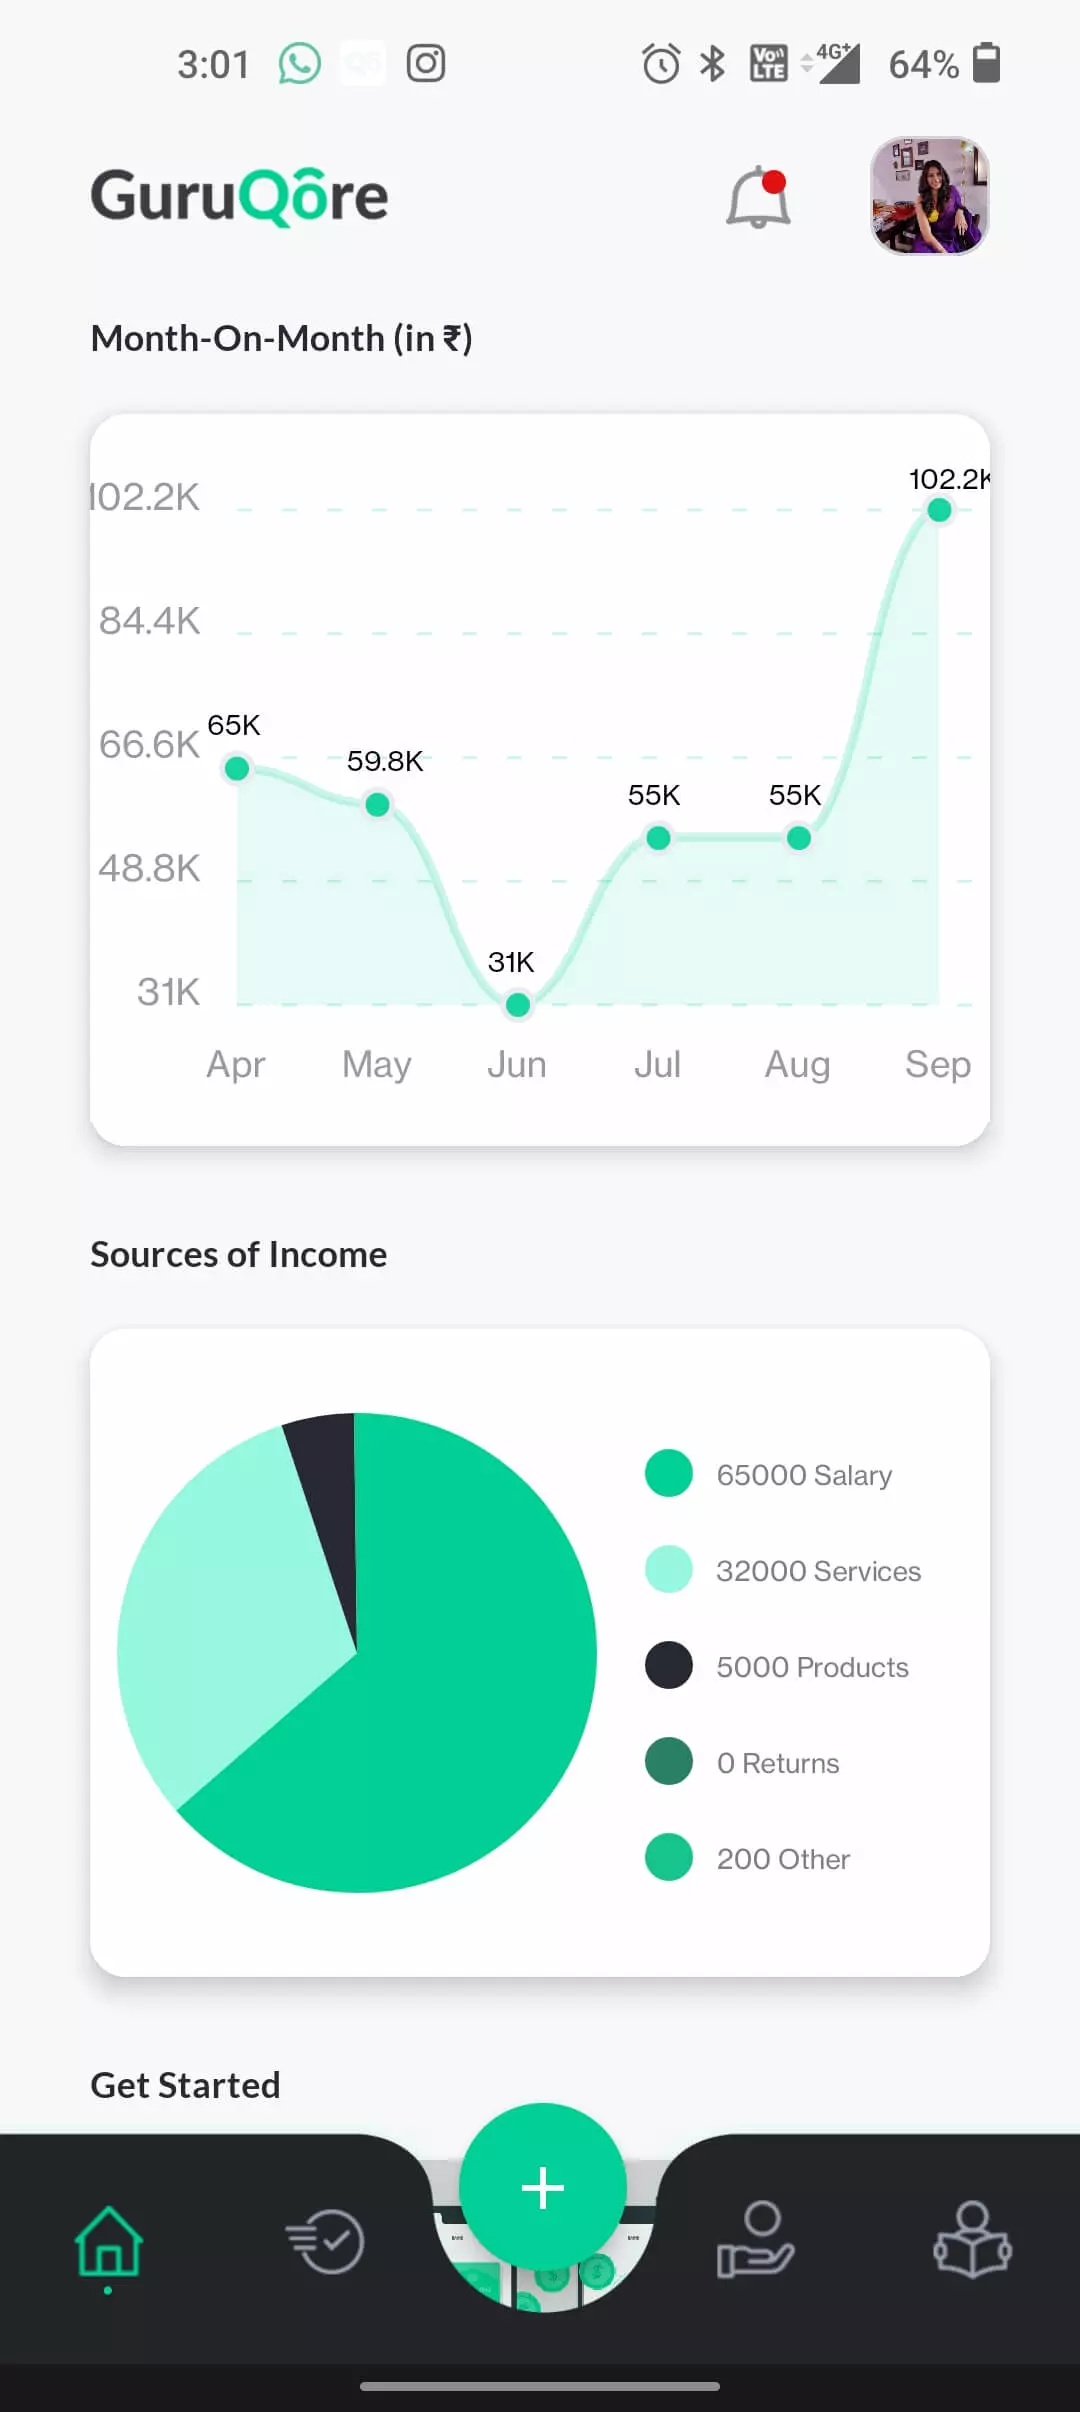 Track your overall earnings on the analytics dashboard!